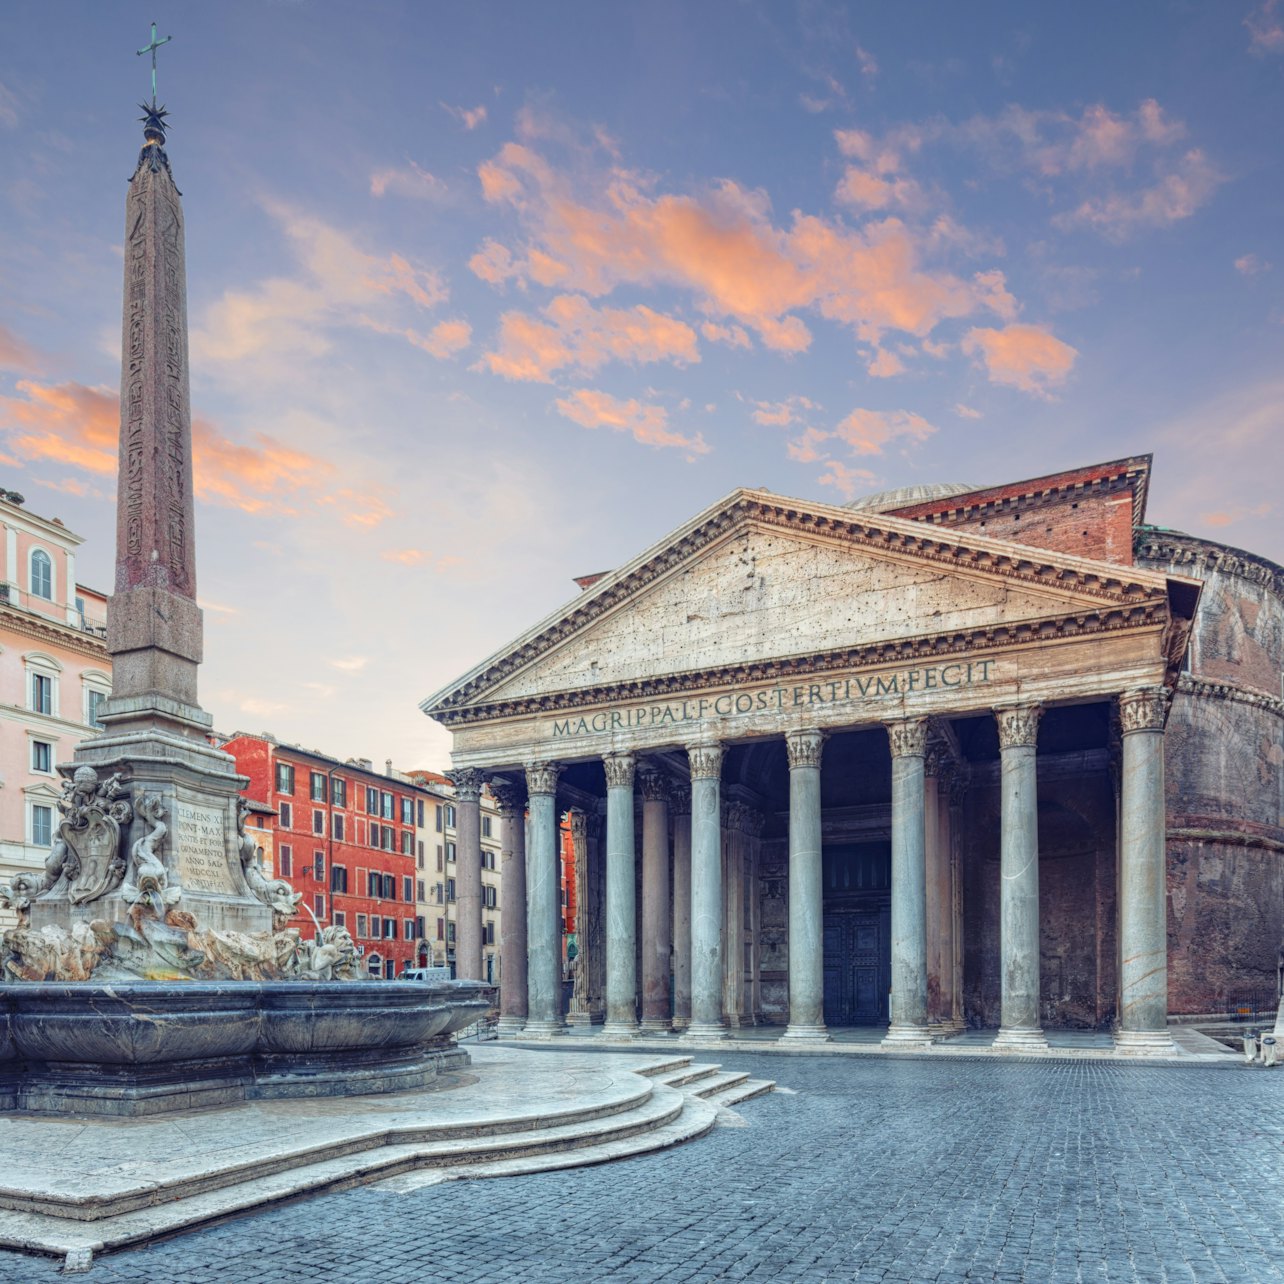 Pantheon: Guided Tour - Accommodations in Rome